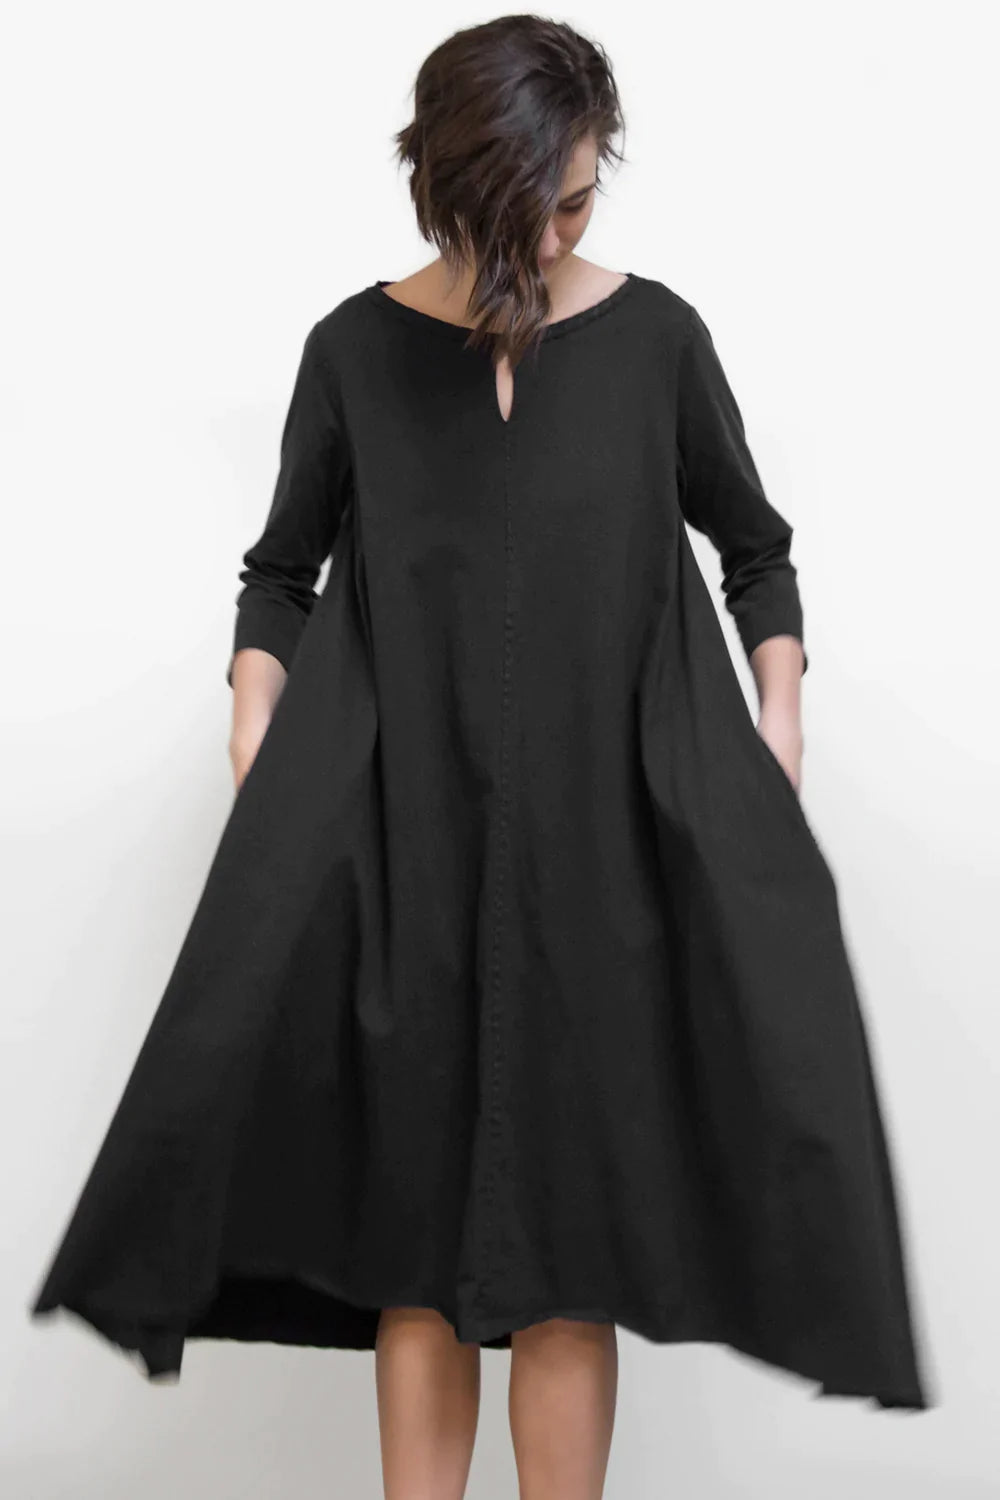 The School of Making model in Keyhole Dress made from 100% organic cotton in black.